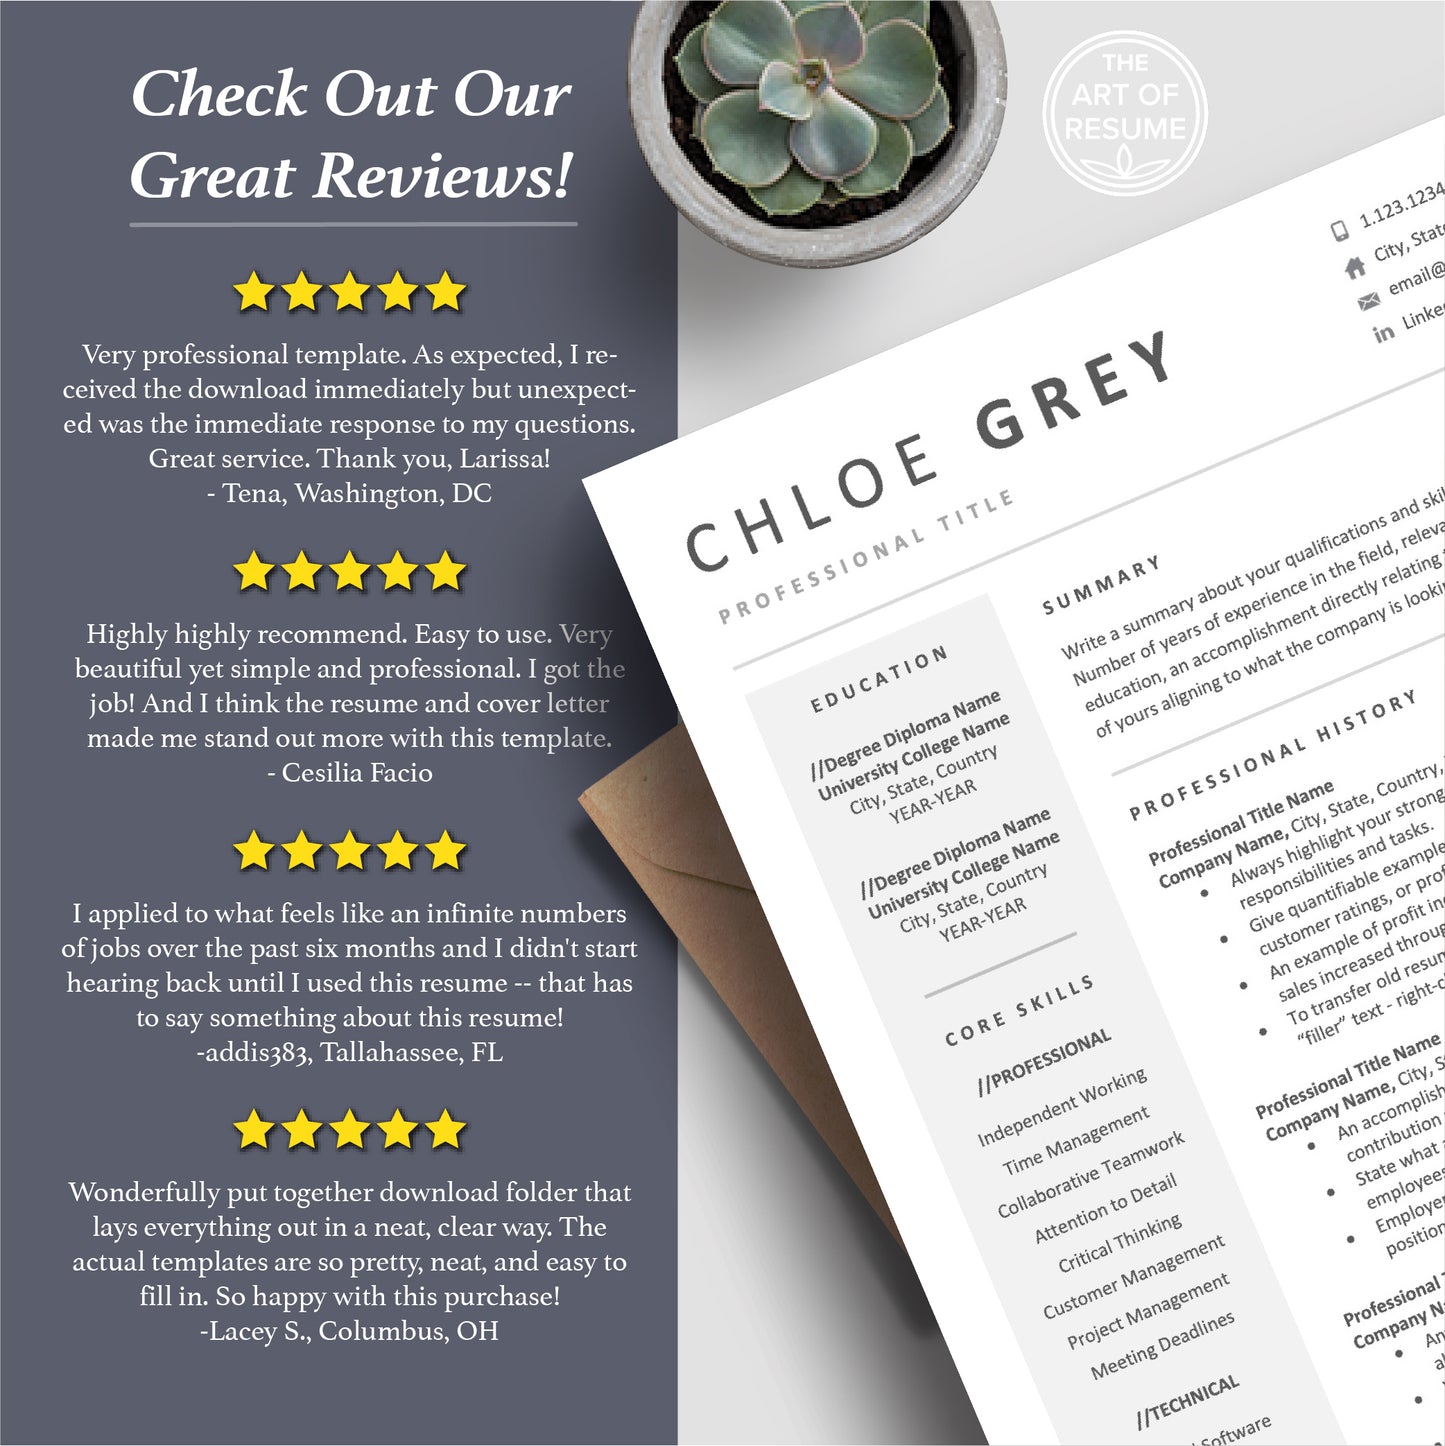 The Art of Resume Templates | Scientist Science Resume CV Templates Online 5-Star Reviews